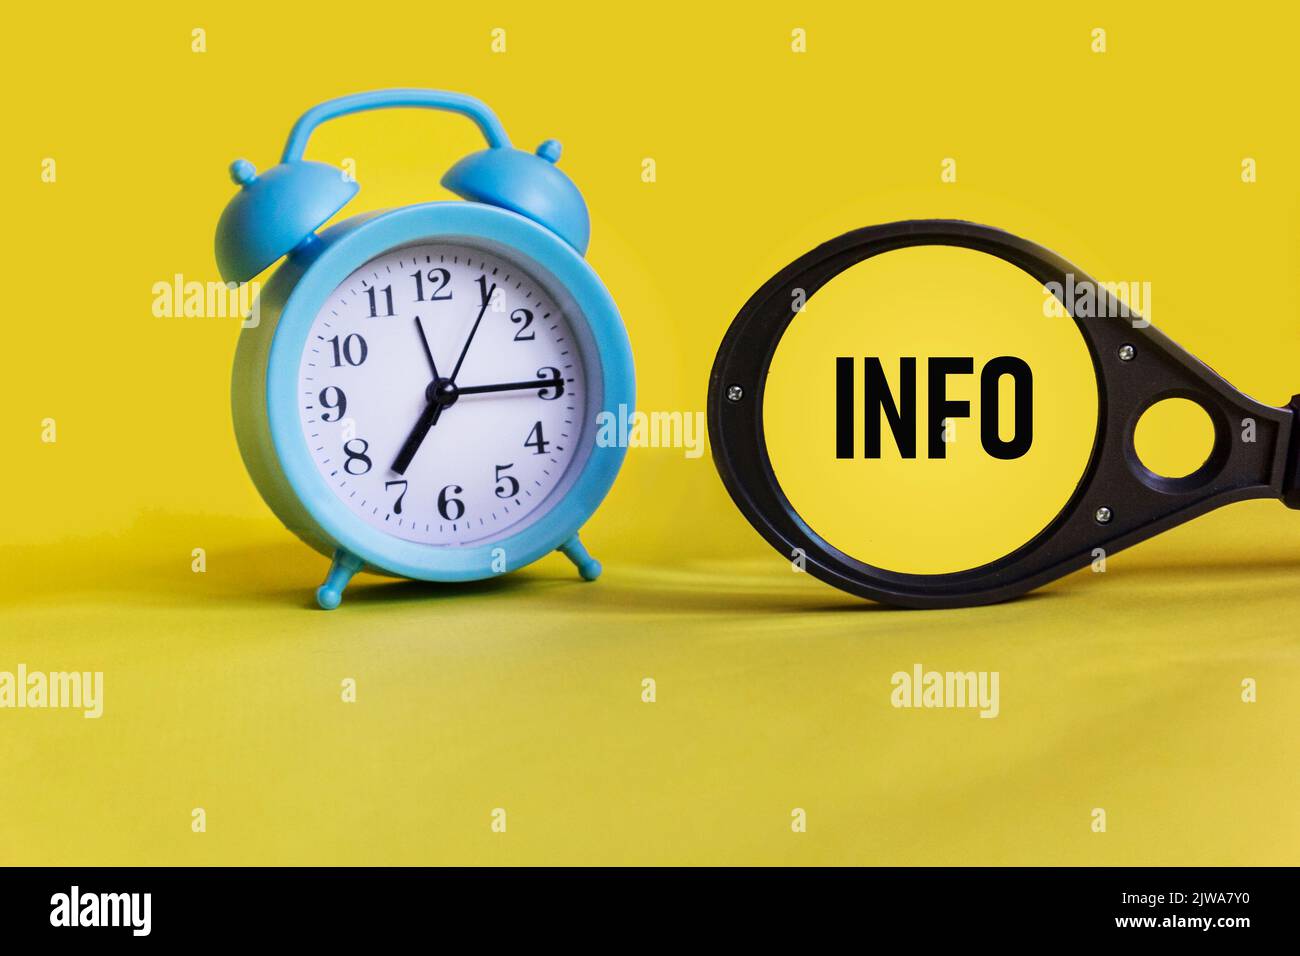 Info word on a magnifying glass on a yellow background with a clock. Business concept. Stock Photo